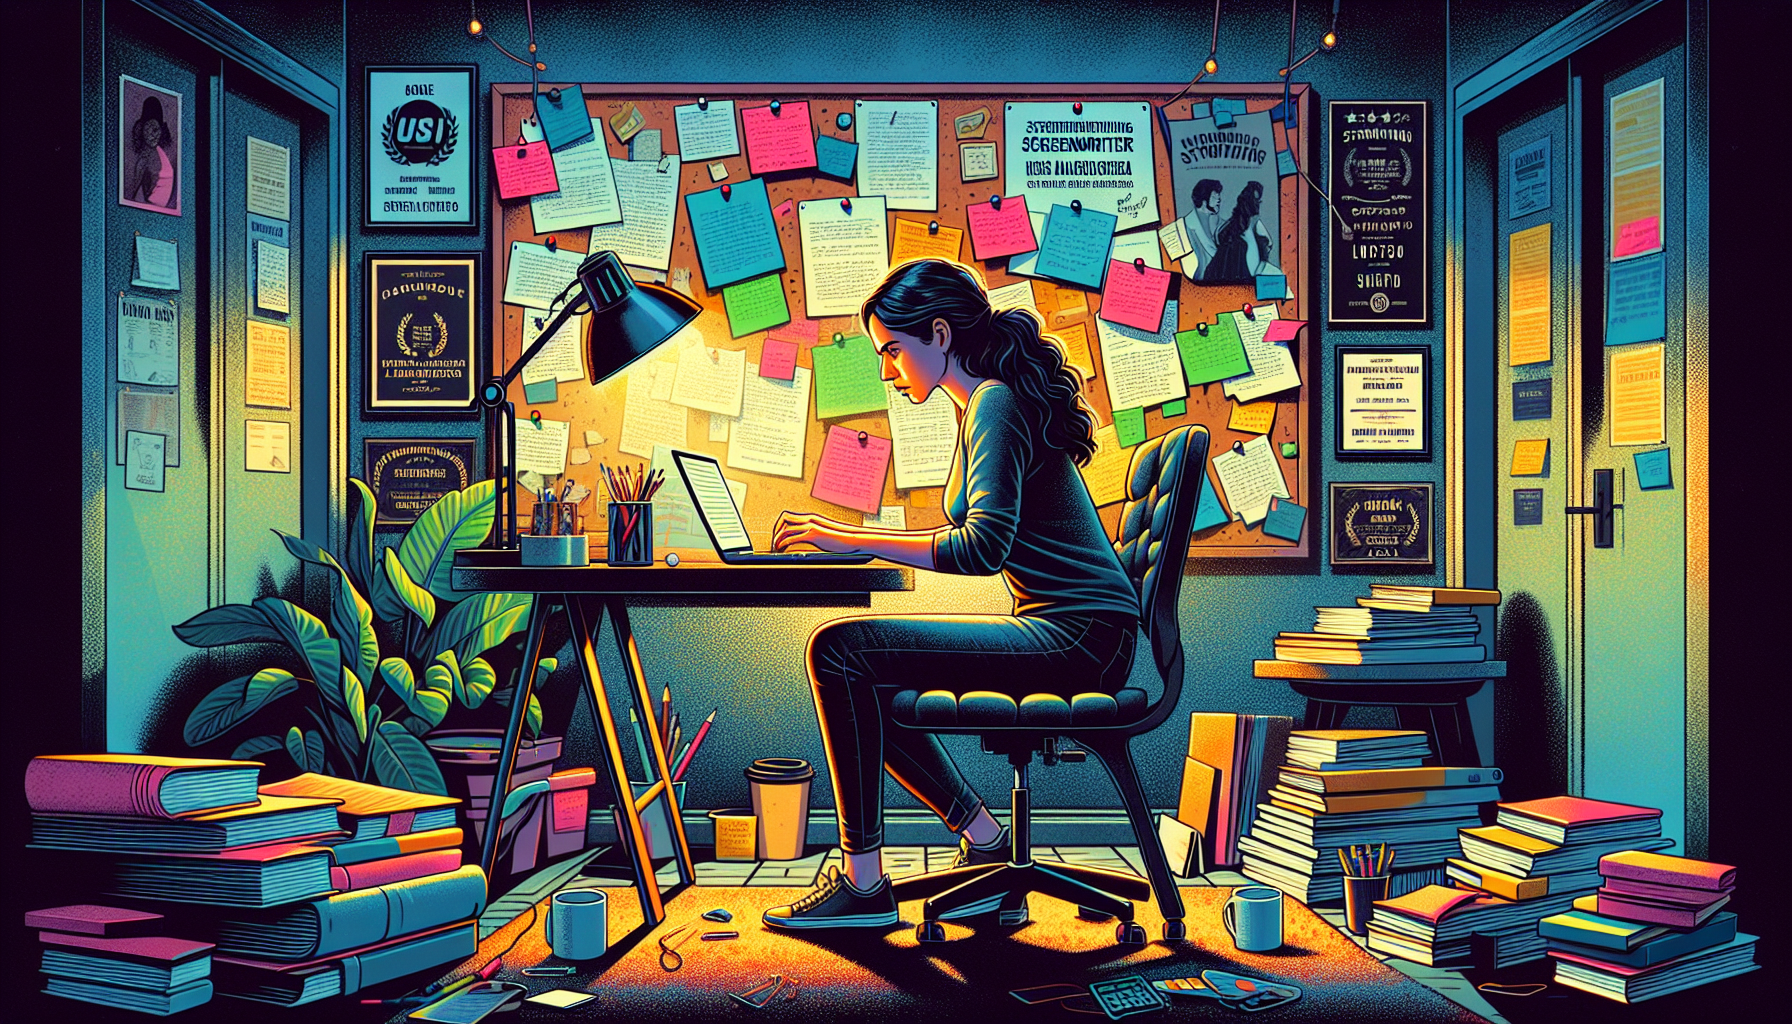 An image of a passionate screenwriter in a cozy, dimly-lit room filled with inspiration—a corkboard covered in colorful notes, storyboards, and character sketches. The screenwriter is seen typing inte